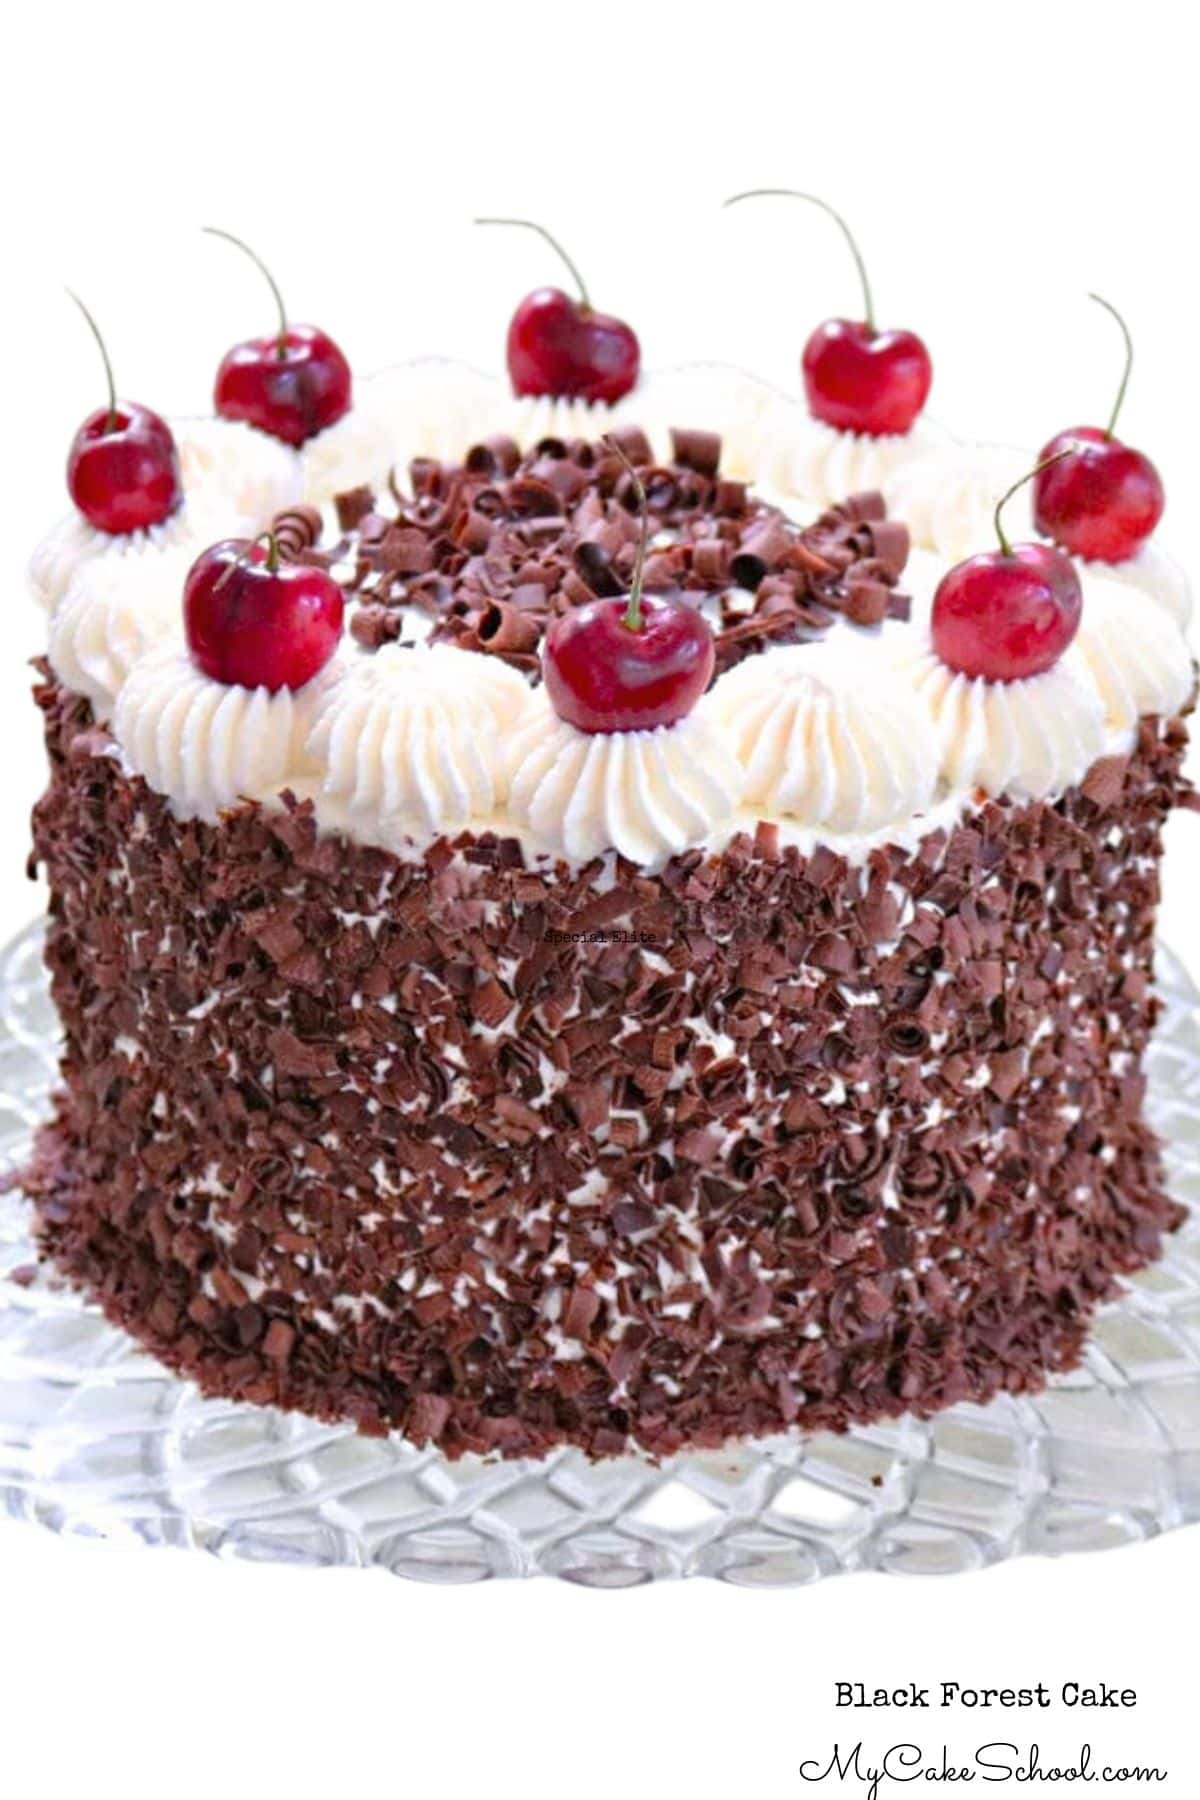 Black Forest Cake on a glass pedestal, topped with whipped cream and cherries, and covered with chocolate shavings.